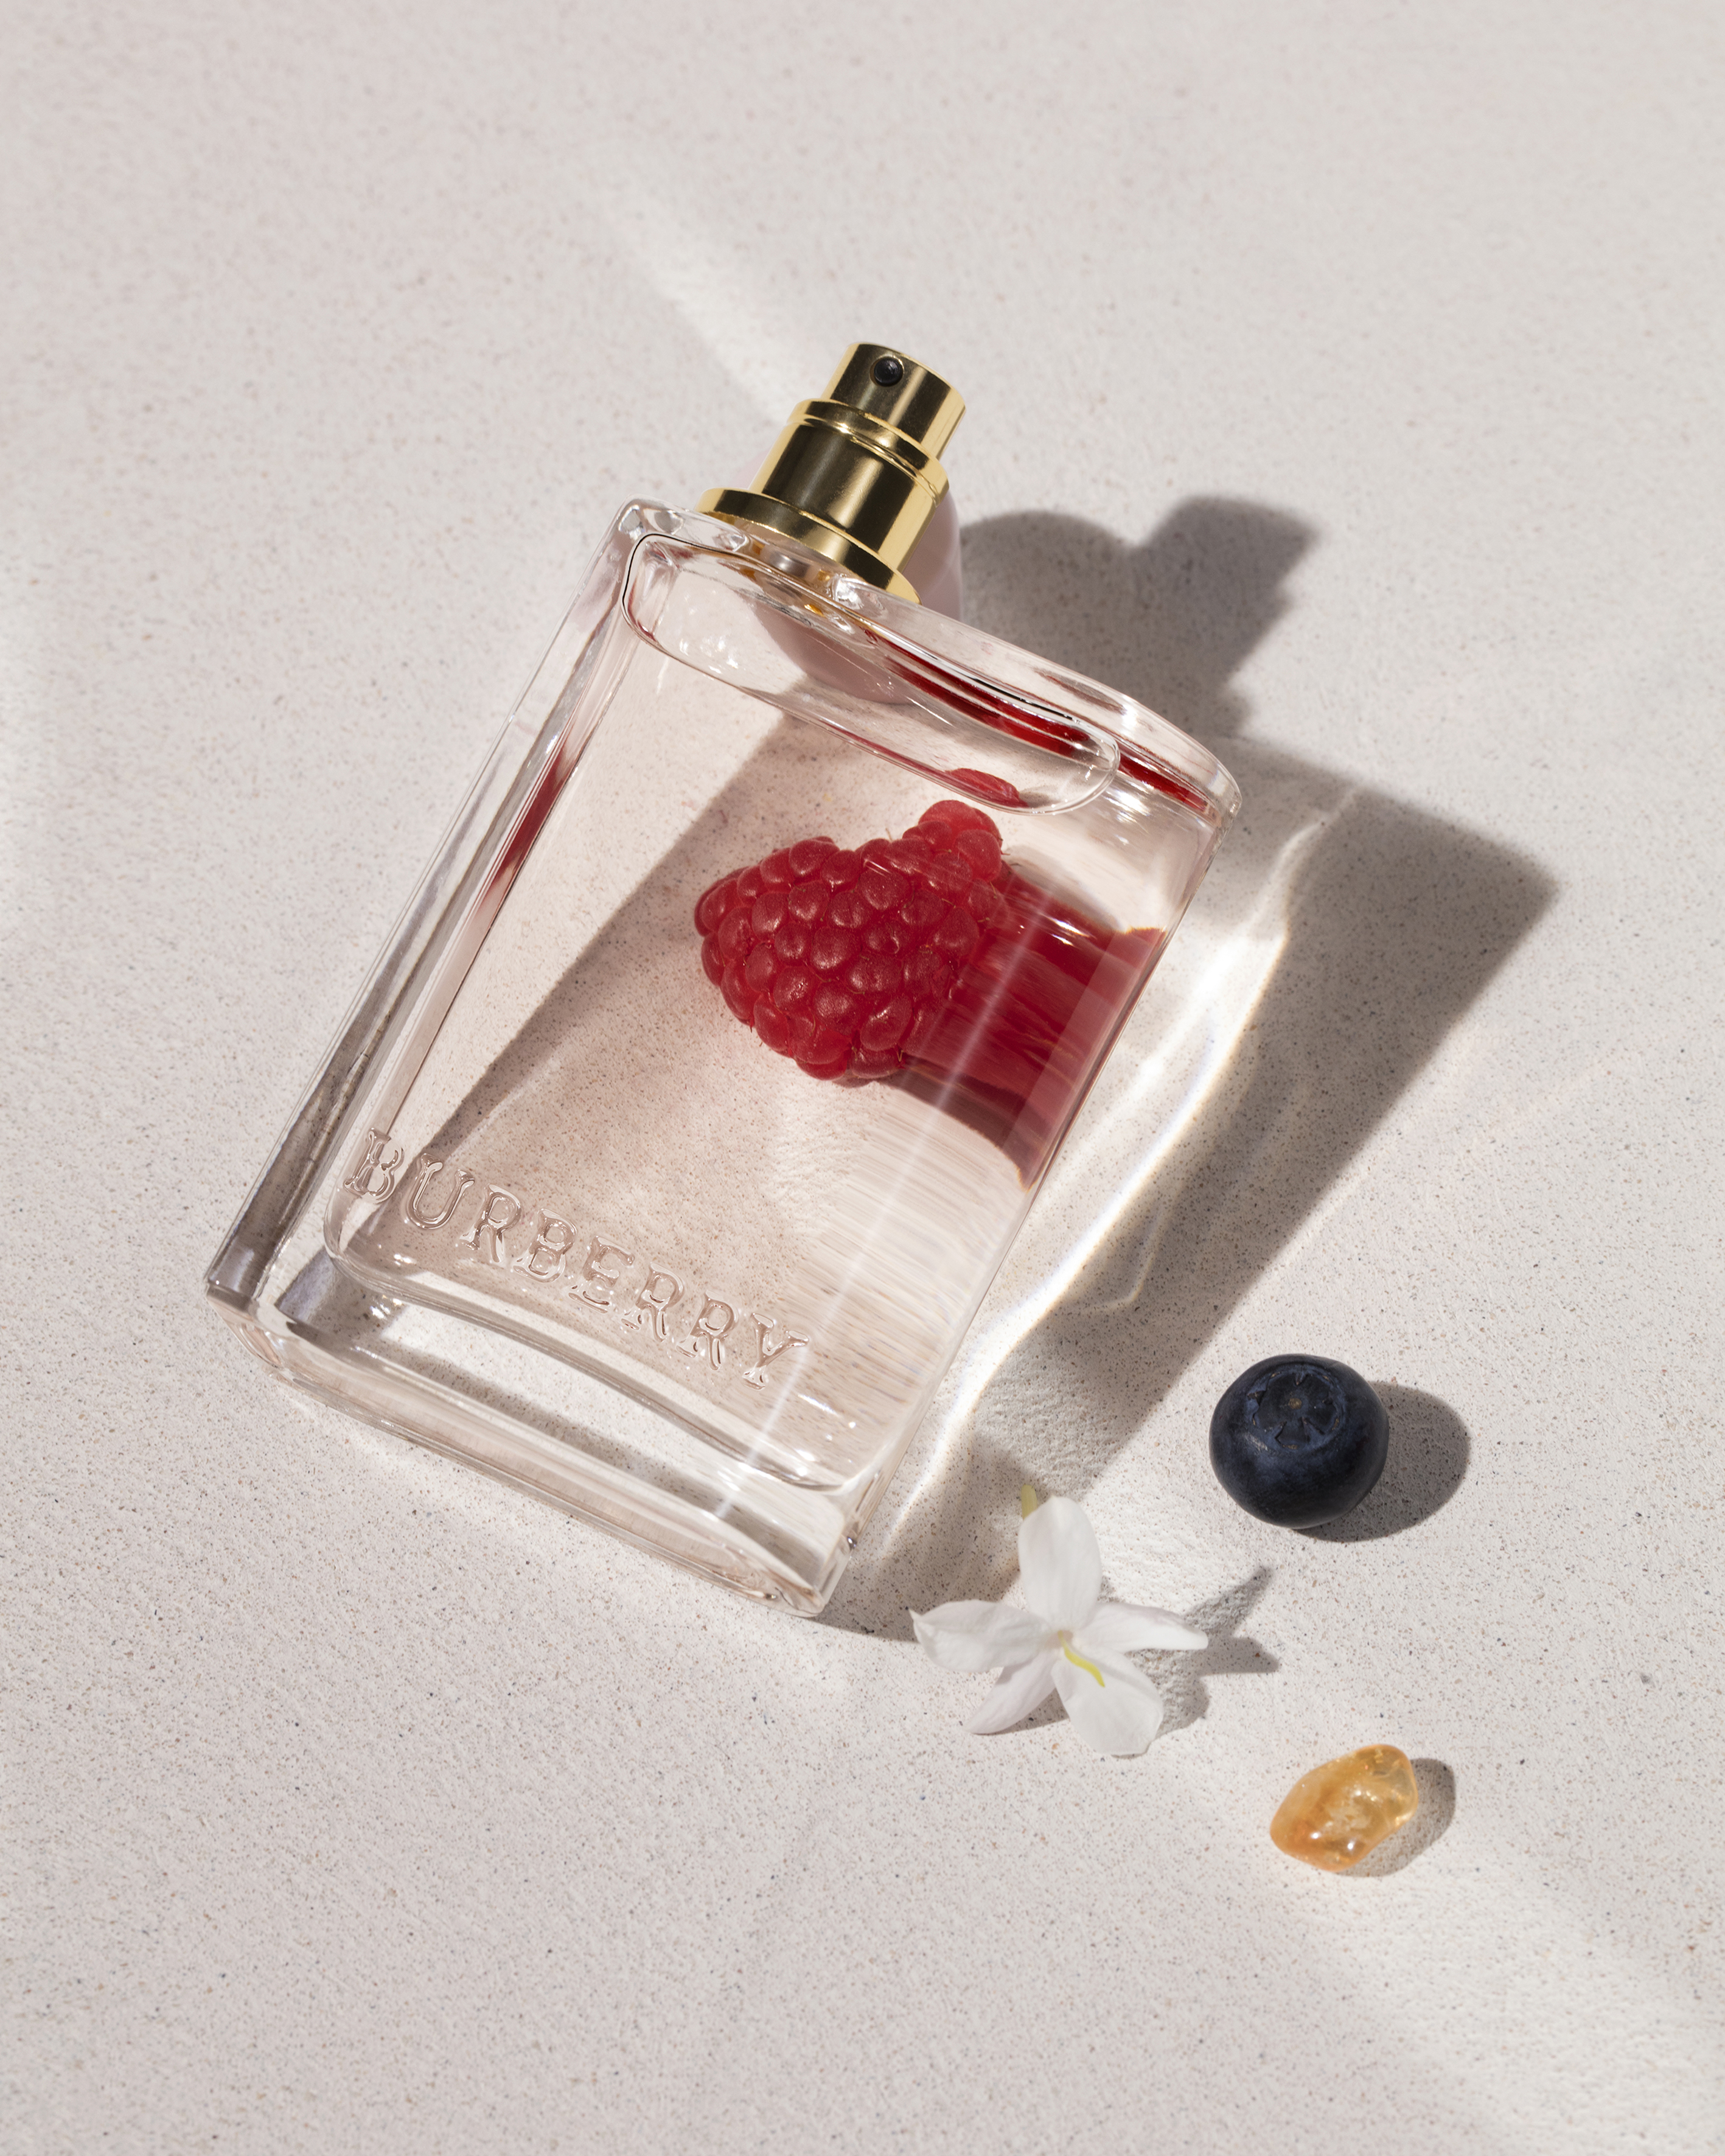 Coty launches Burberry Her fragrance 